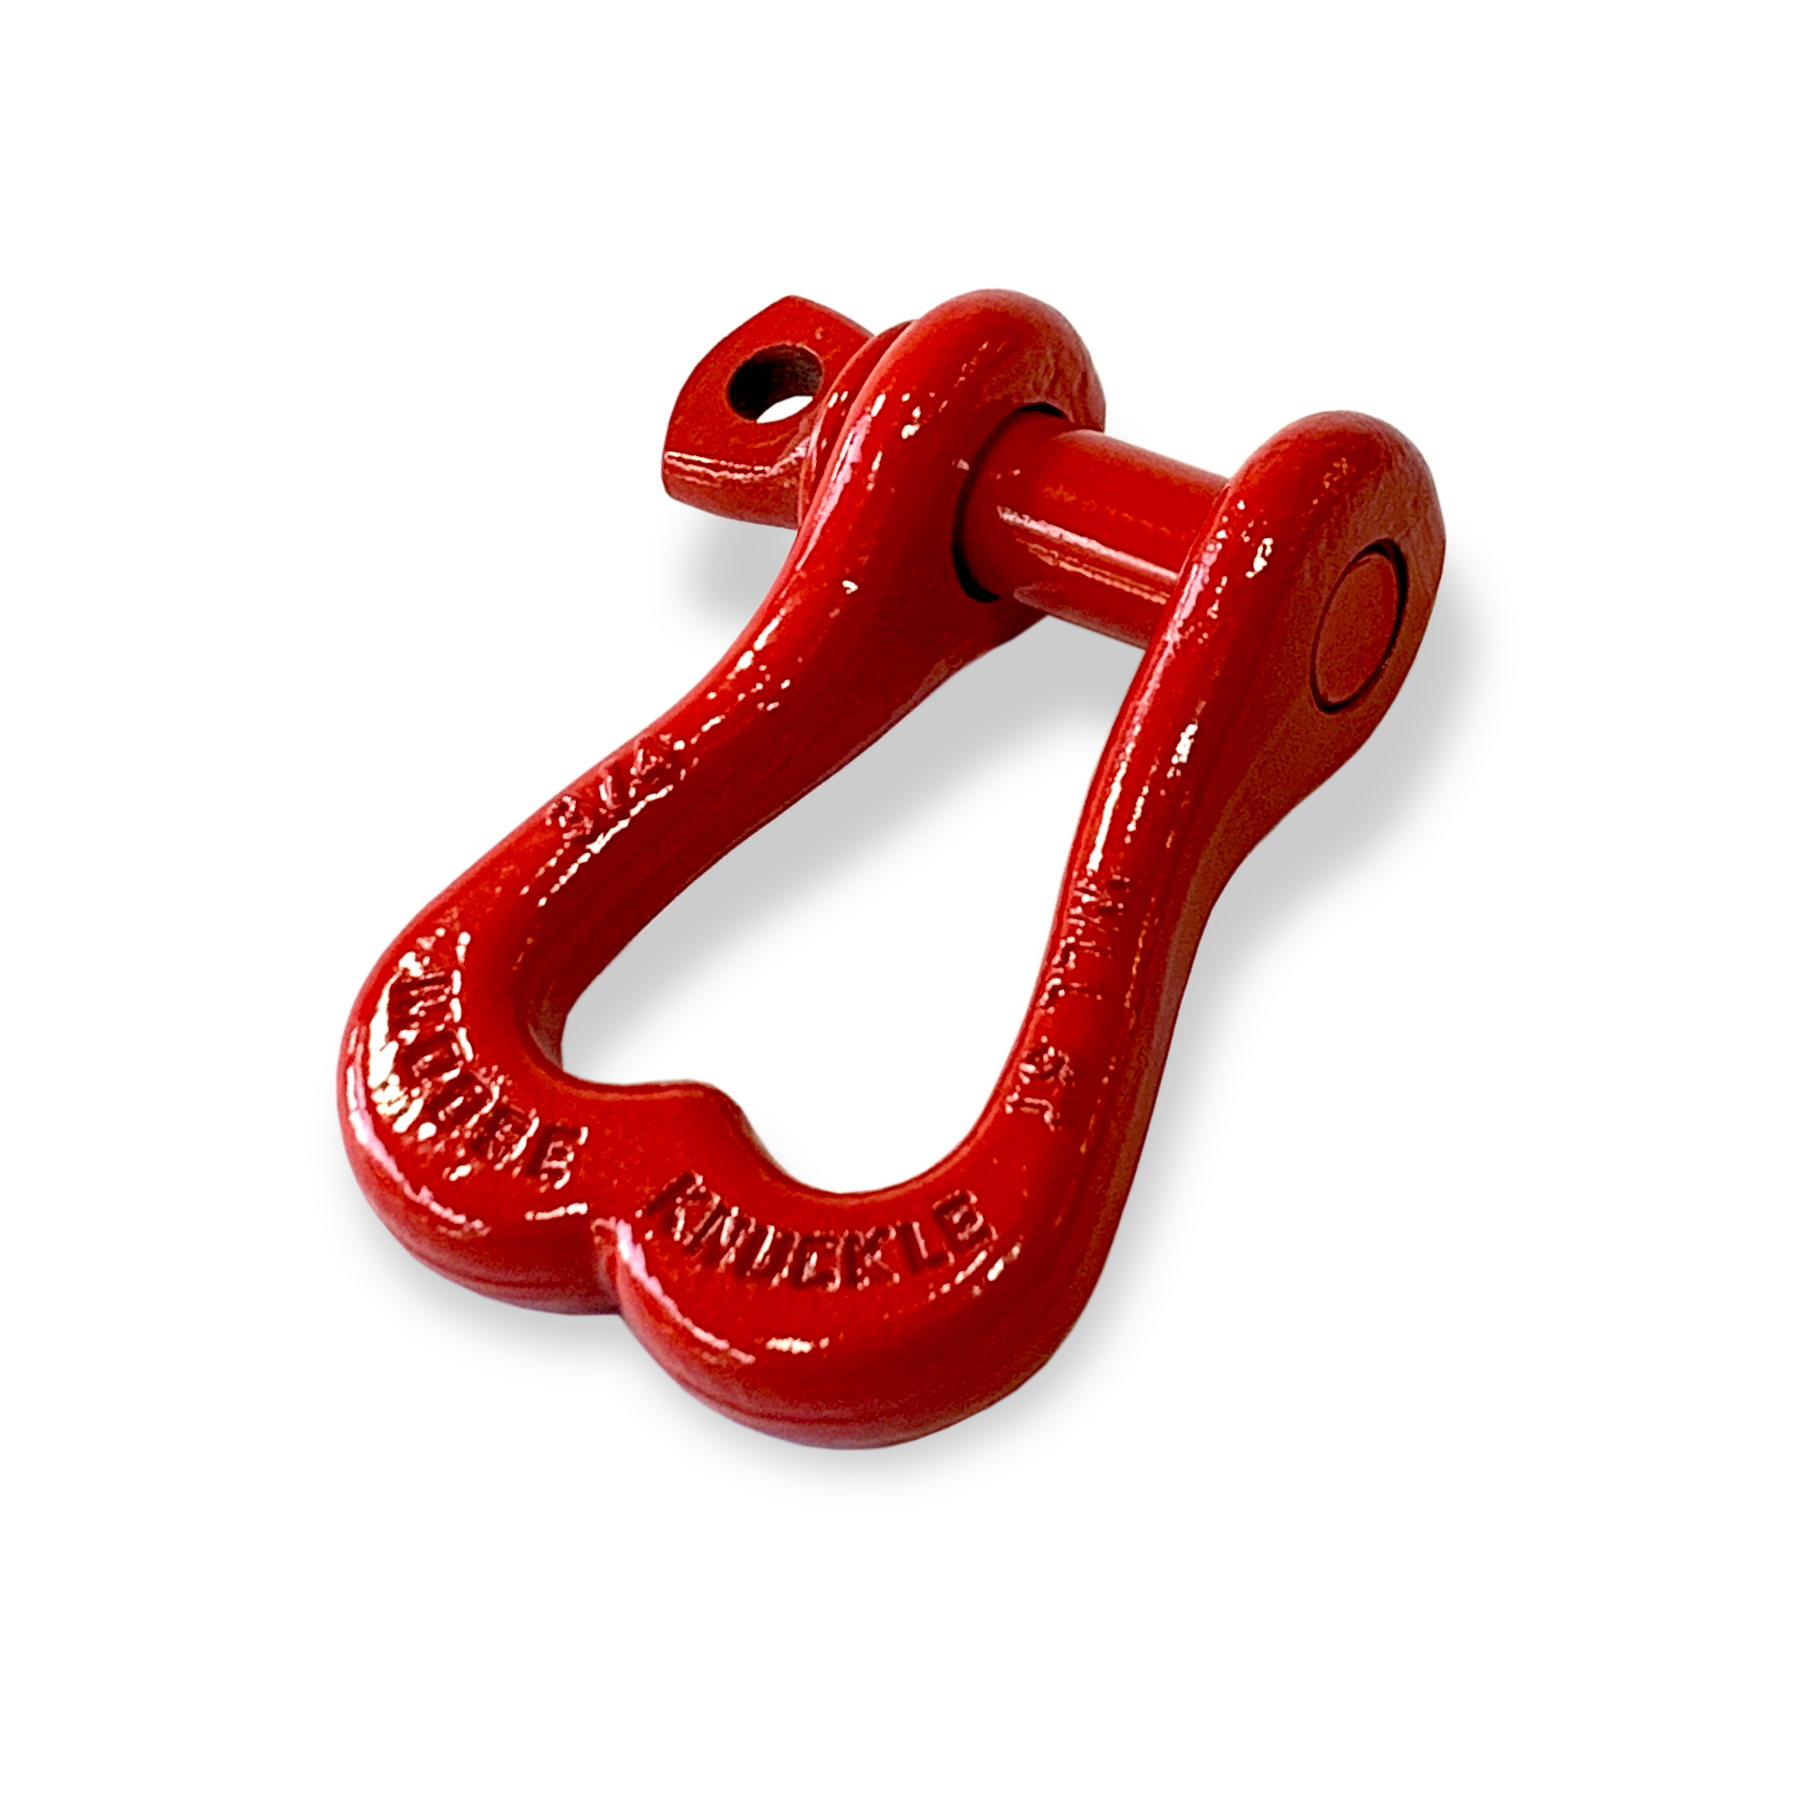 Moose Knuckle XL Flame Red Powder Coated Colored Shackle for Tow Straps, Off Roading and Truck Nuts Vehicle Recovery